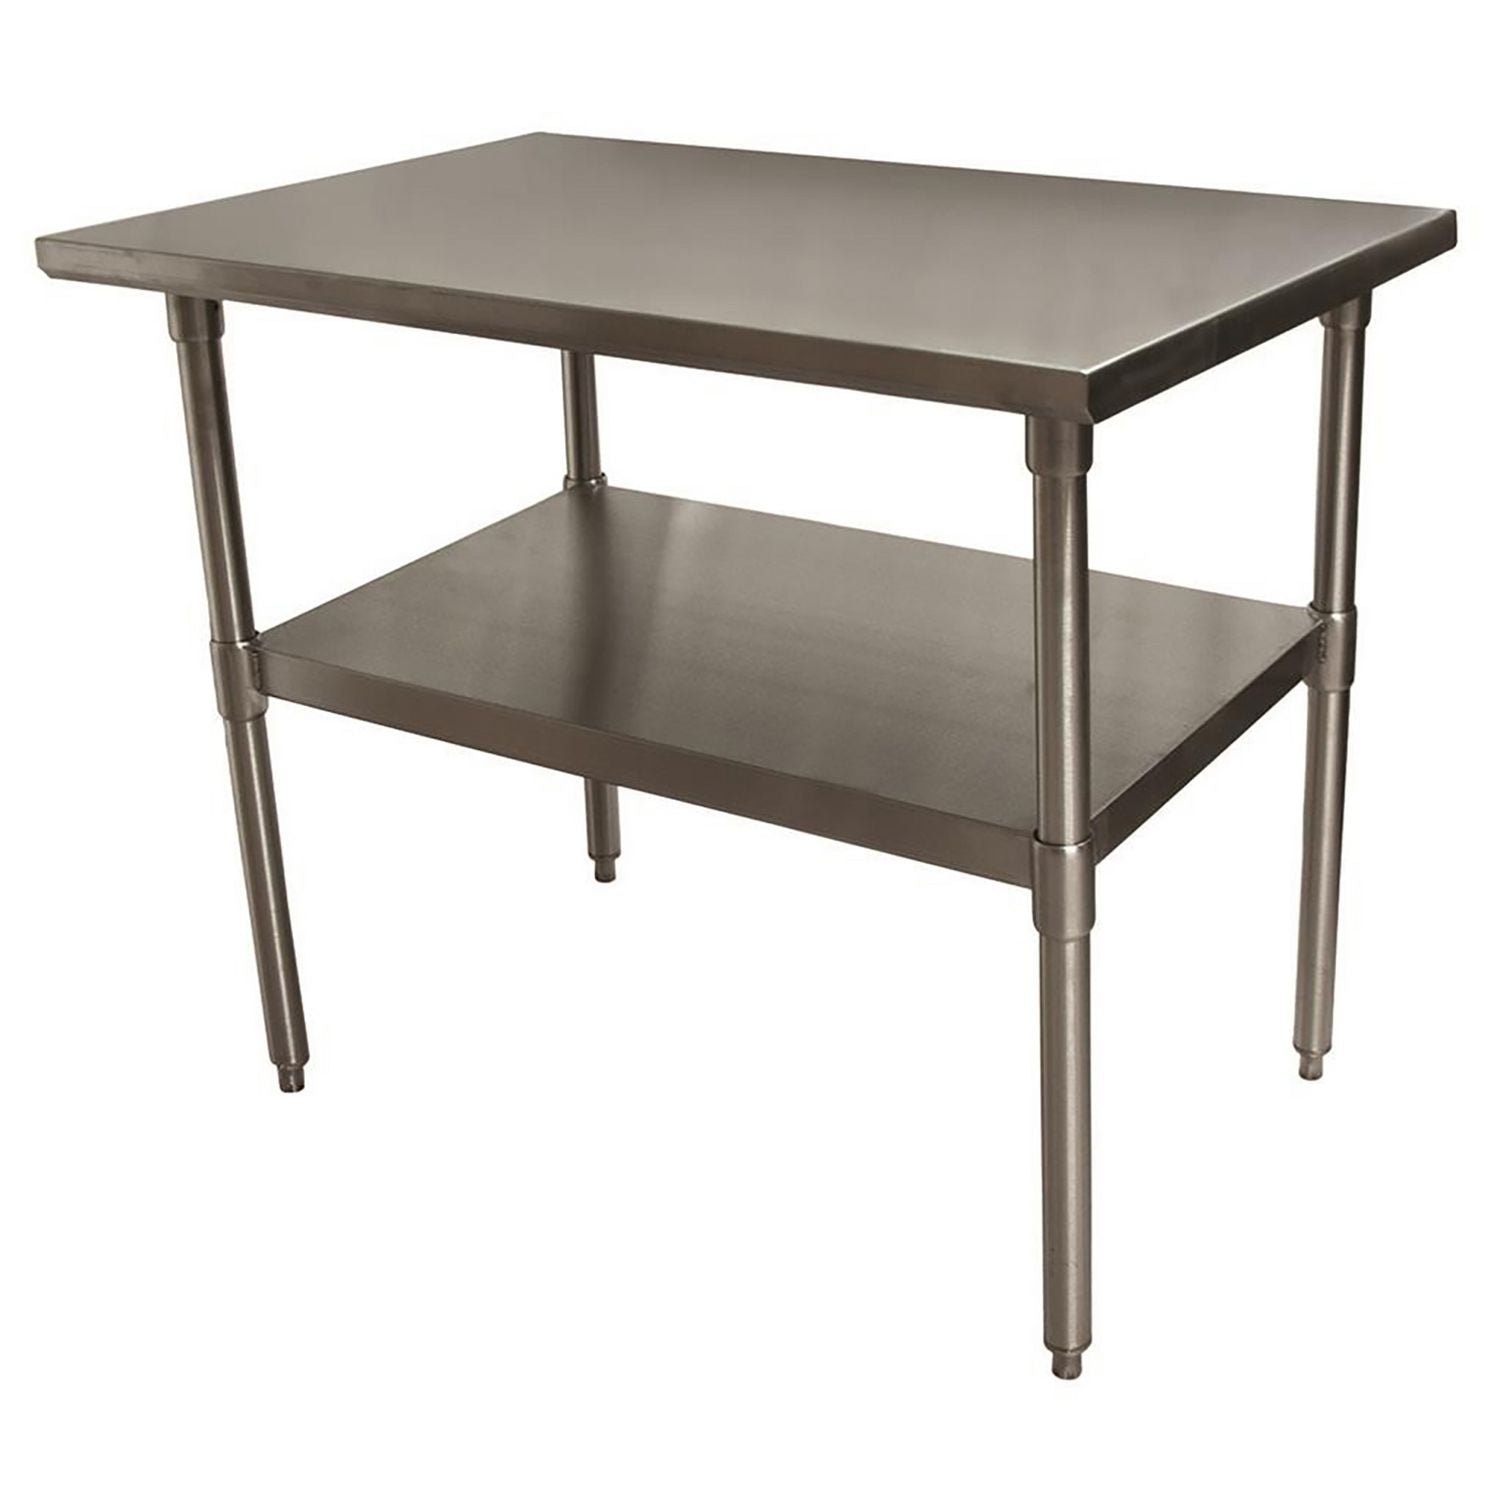 stainless-steel-flat-top-work-tables-48w-x-30d-x-36h-silver-2-pallet-ships-in-4-6-business-days_bke2vt4830 - 8